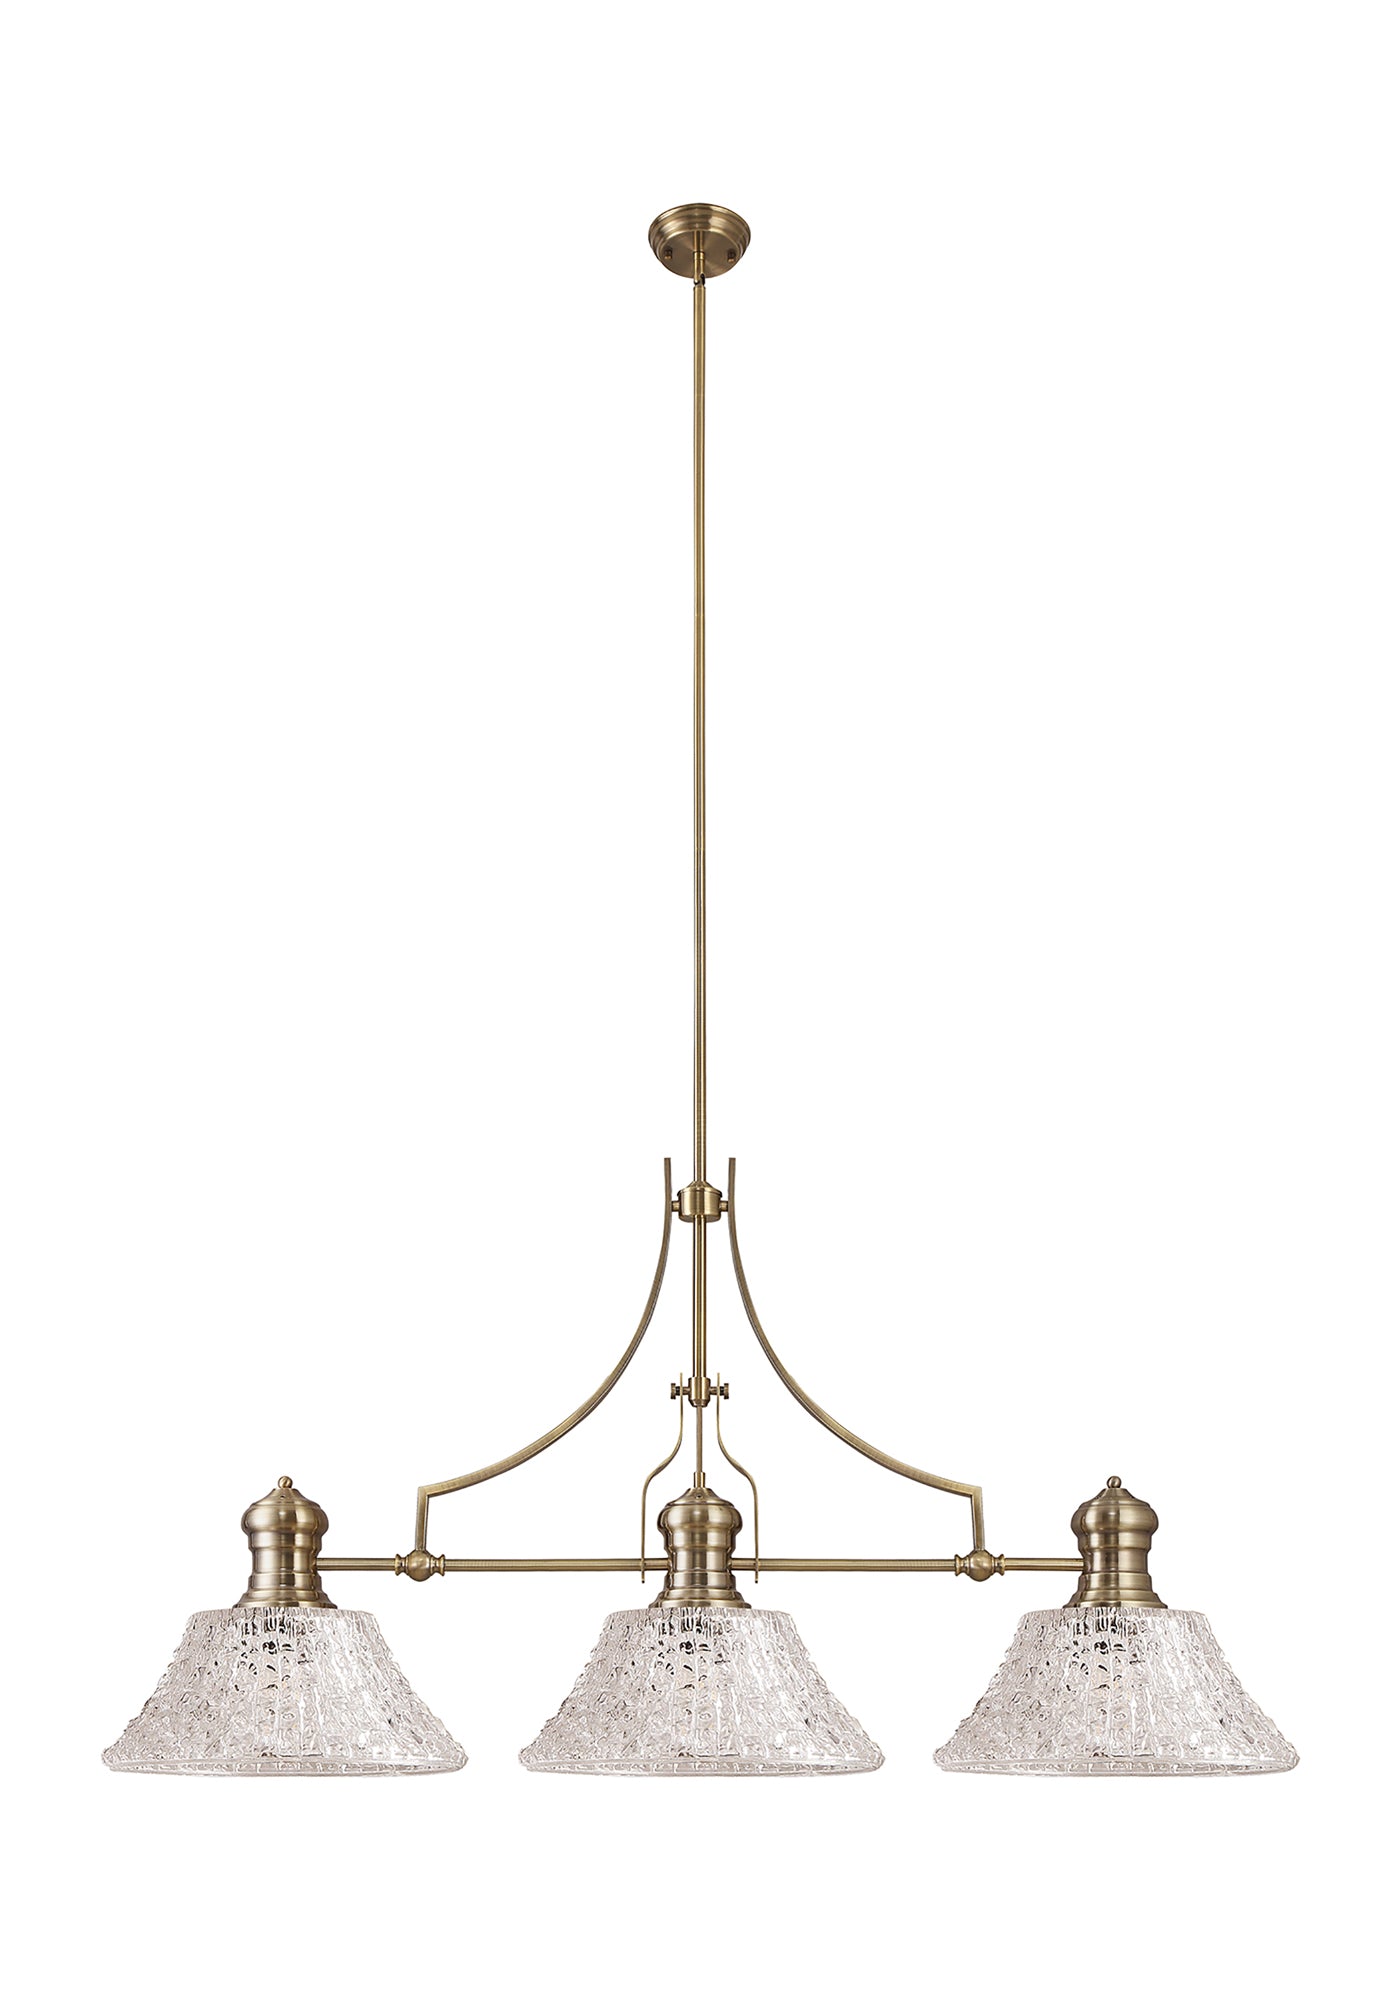 Docker Linear Pendant With 38cm Patterned Round Shade, 3 x E27, Antique Brass/Clear Glass Item Weight: 19.1kg LOK104743